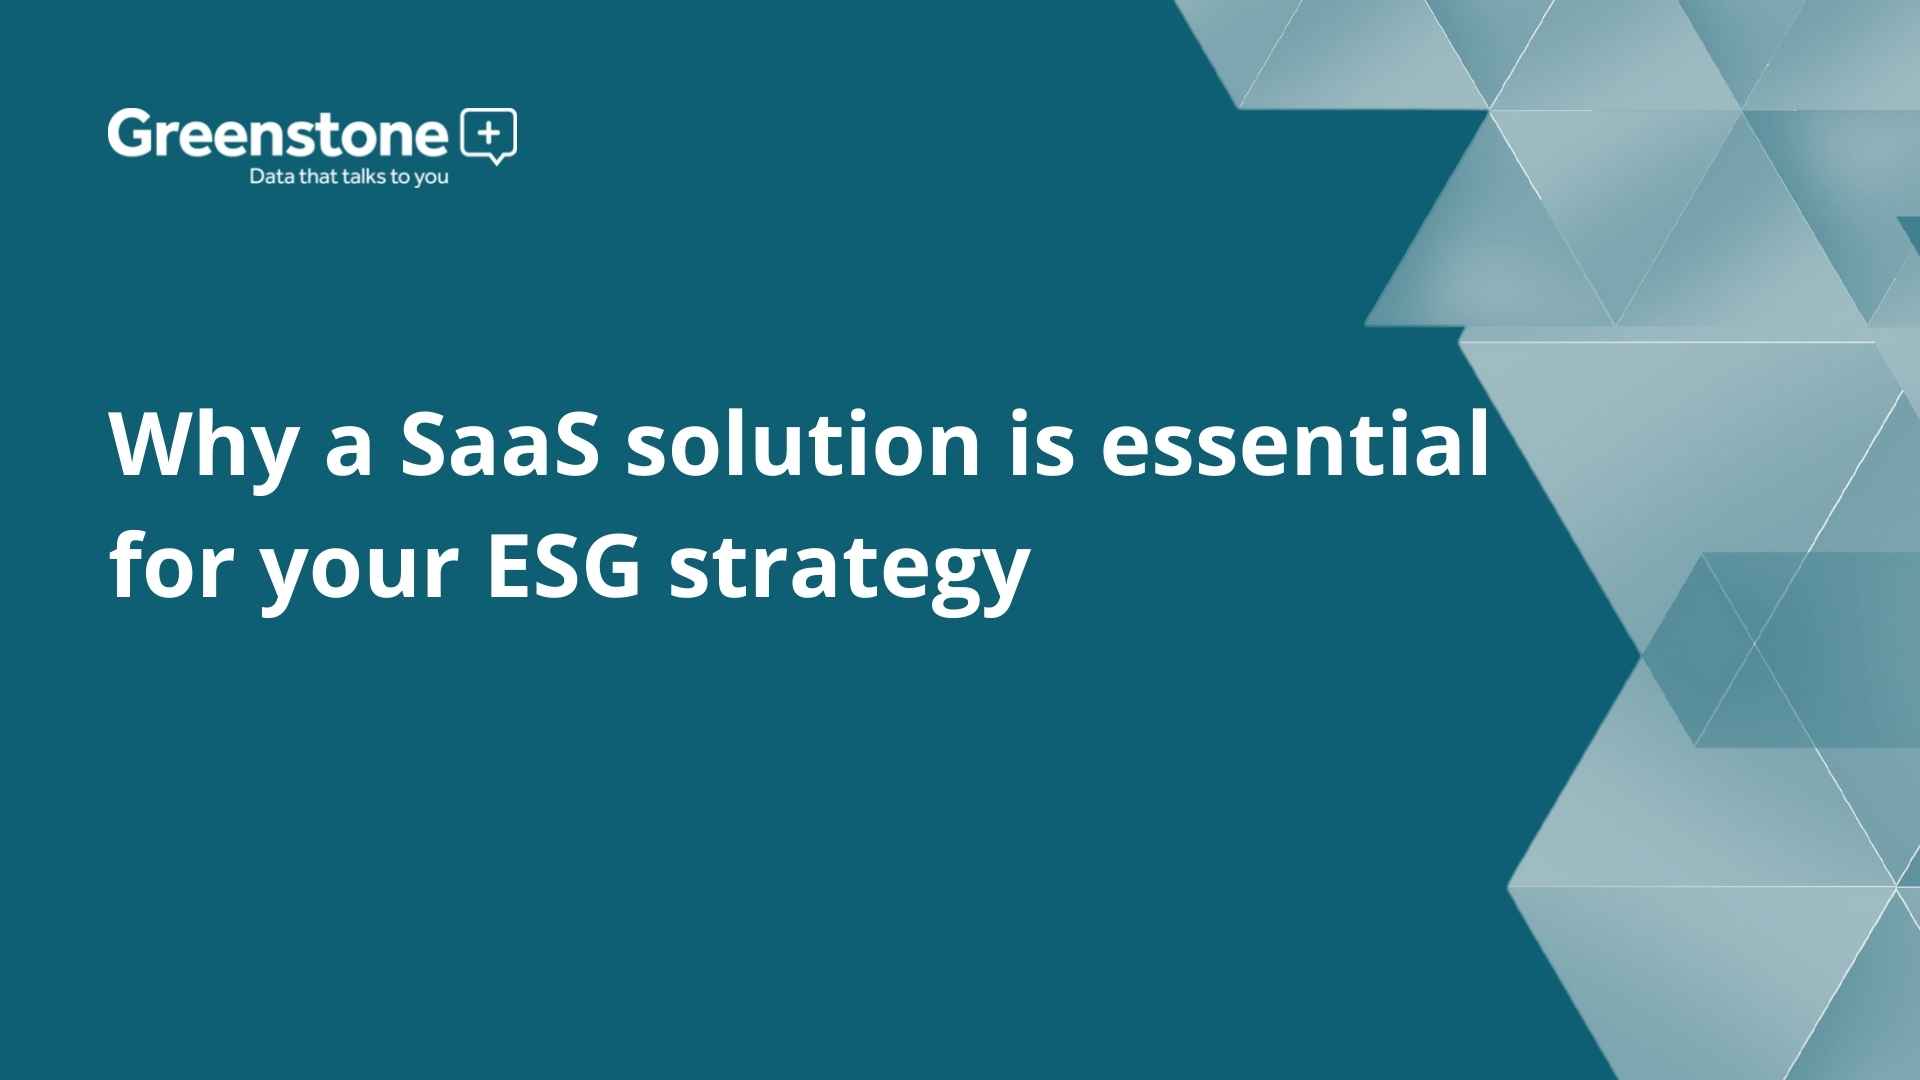 Why a SaaS solution is essential for your ESG strategy